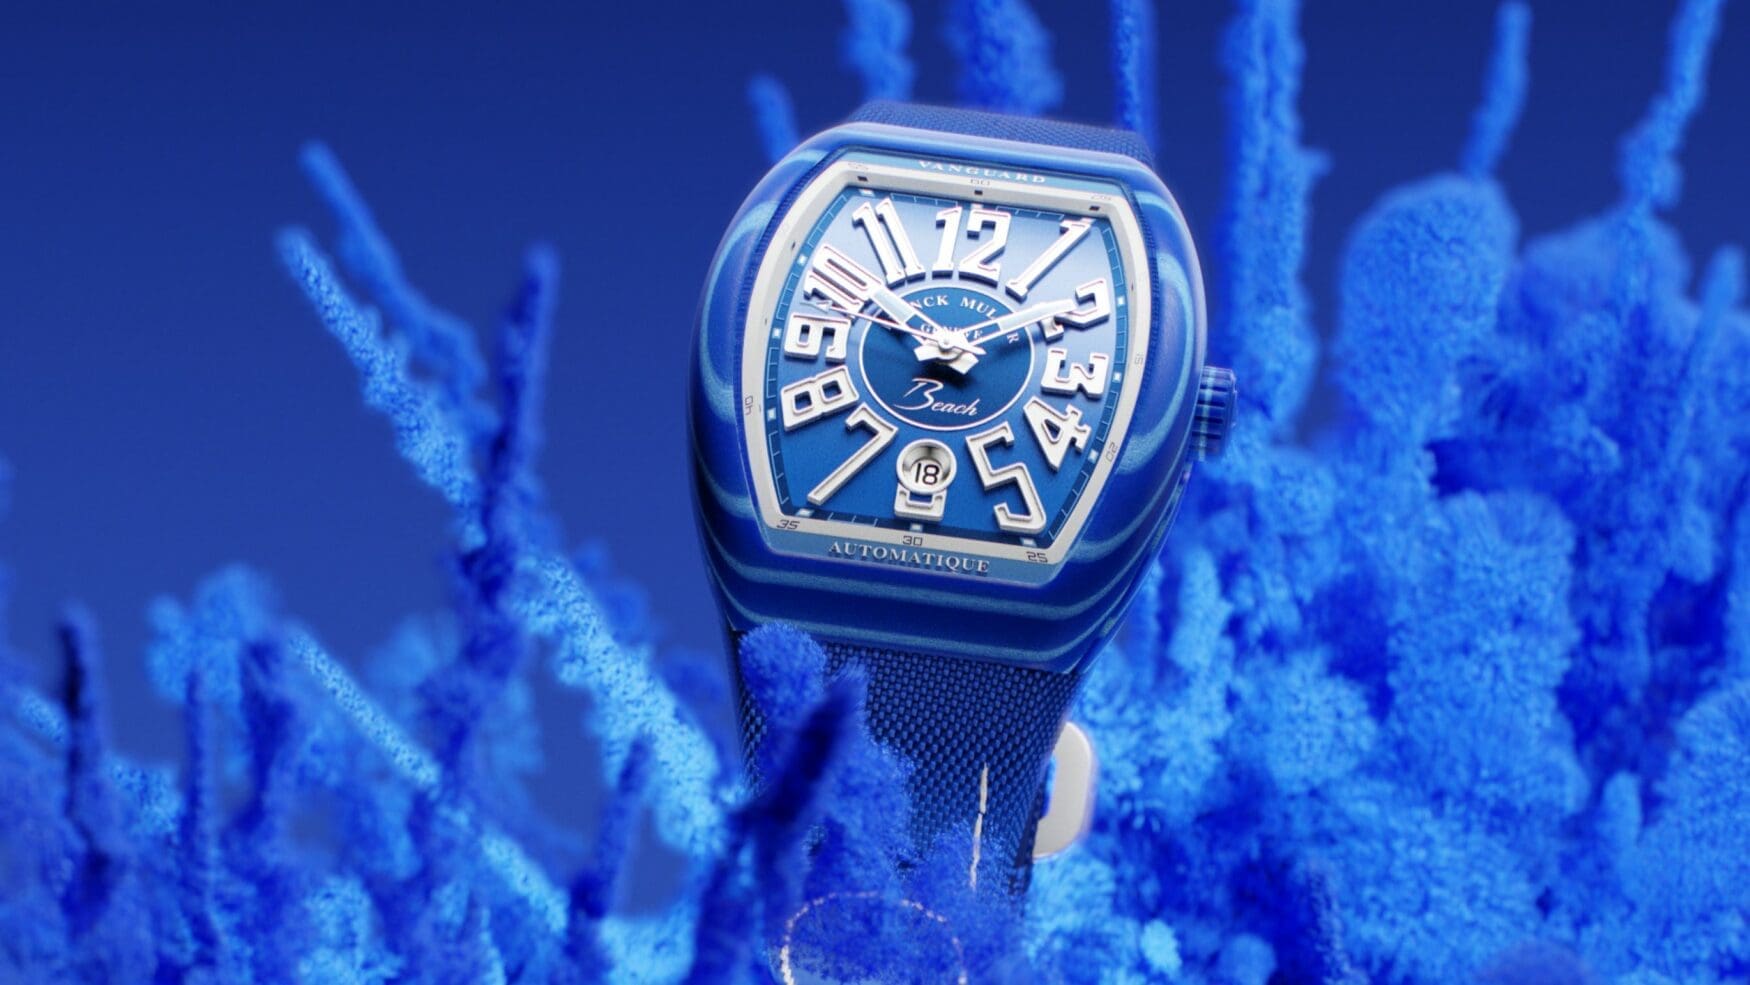 The Franck Muller Vanguard Beach is a summery sports watch inspired by the sea